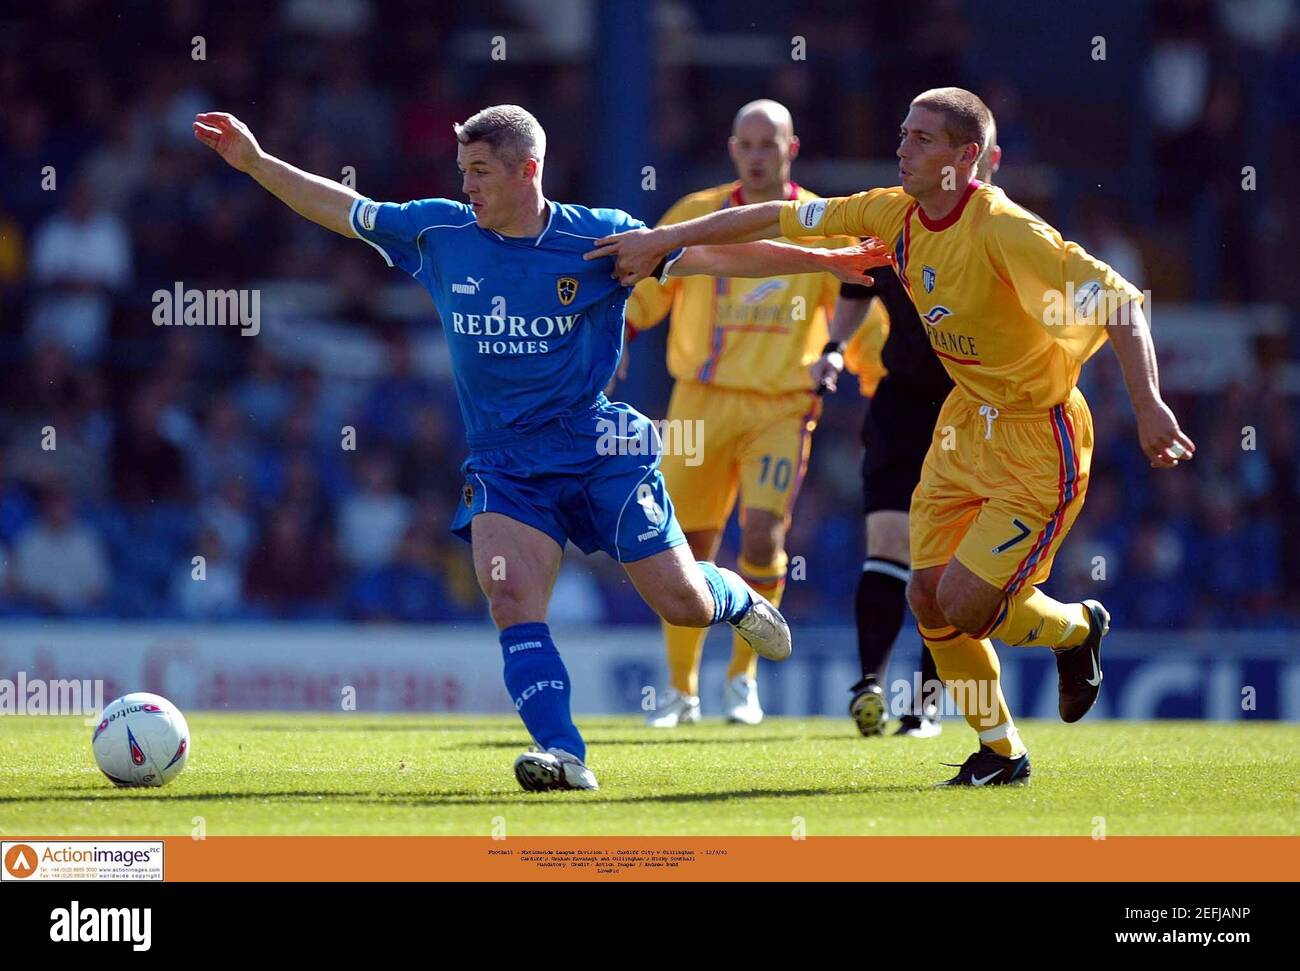 Football - Nationwide League Division 1 - Cardiff City v Gillingham  - 13/9/03  Cardiff's Graham Kavanagh and Gillingham's Nicky Southall  Mandatory  Credit: Action Images / Andrew Budd  LivePic Stock Photo